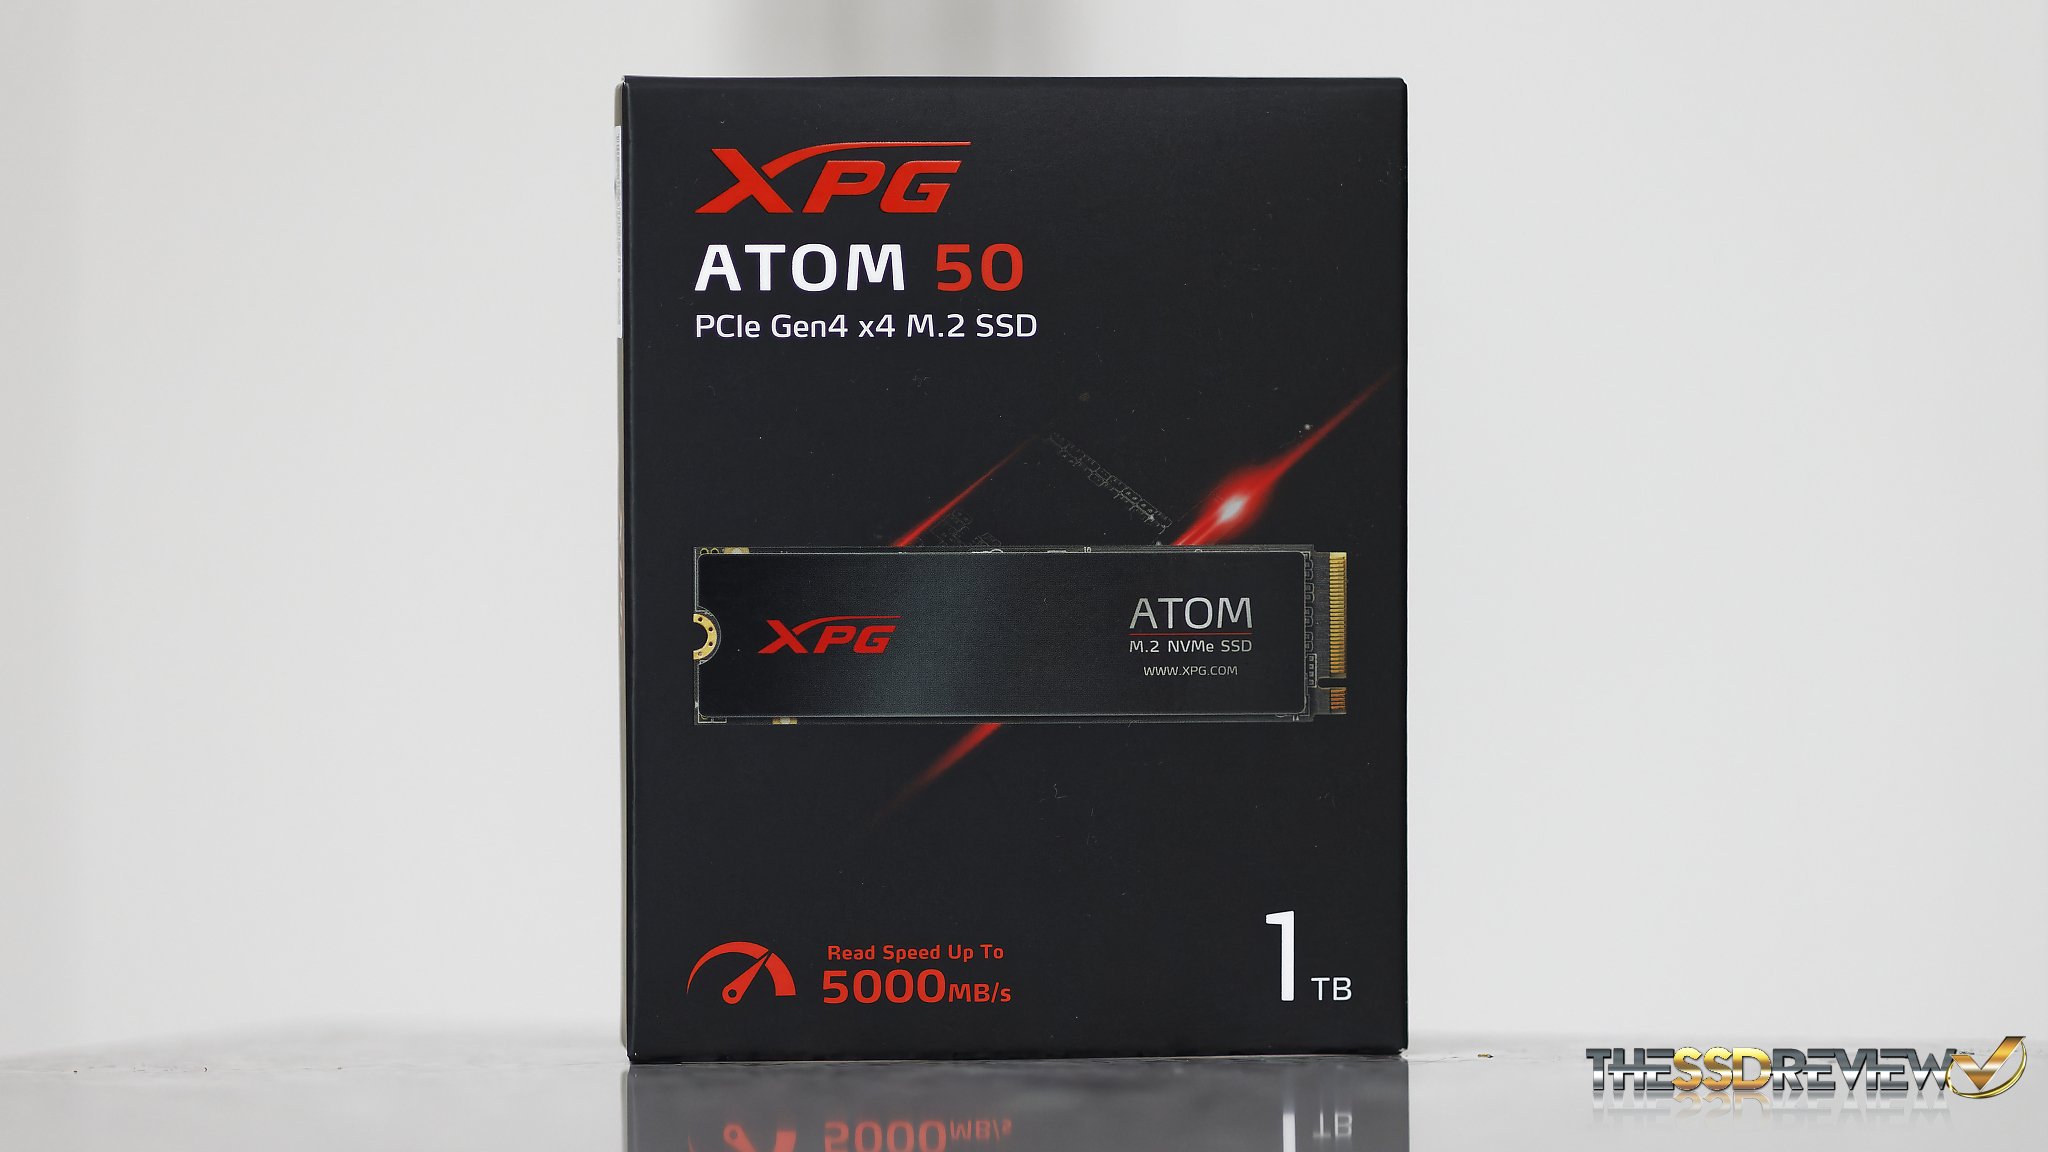 XPG Atom 50 Gen 4 NVMe SSD Review - A DRAM-less SSD Competes with